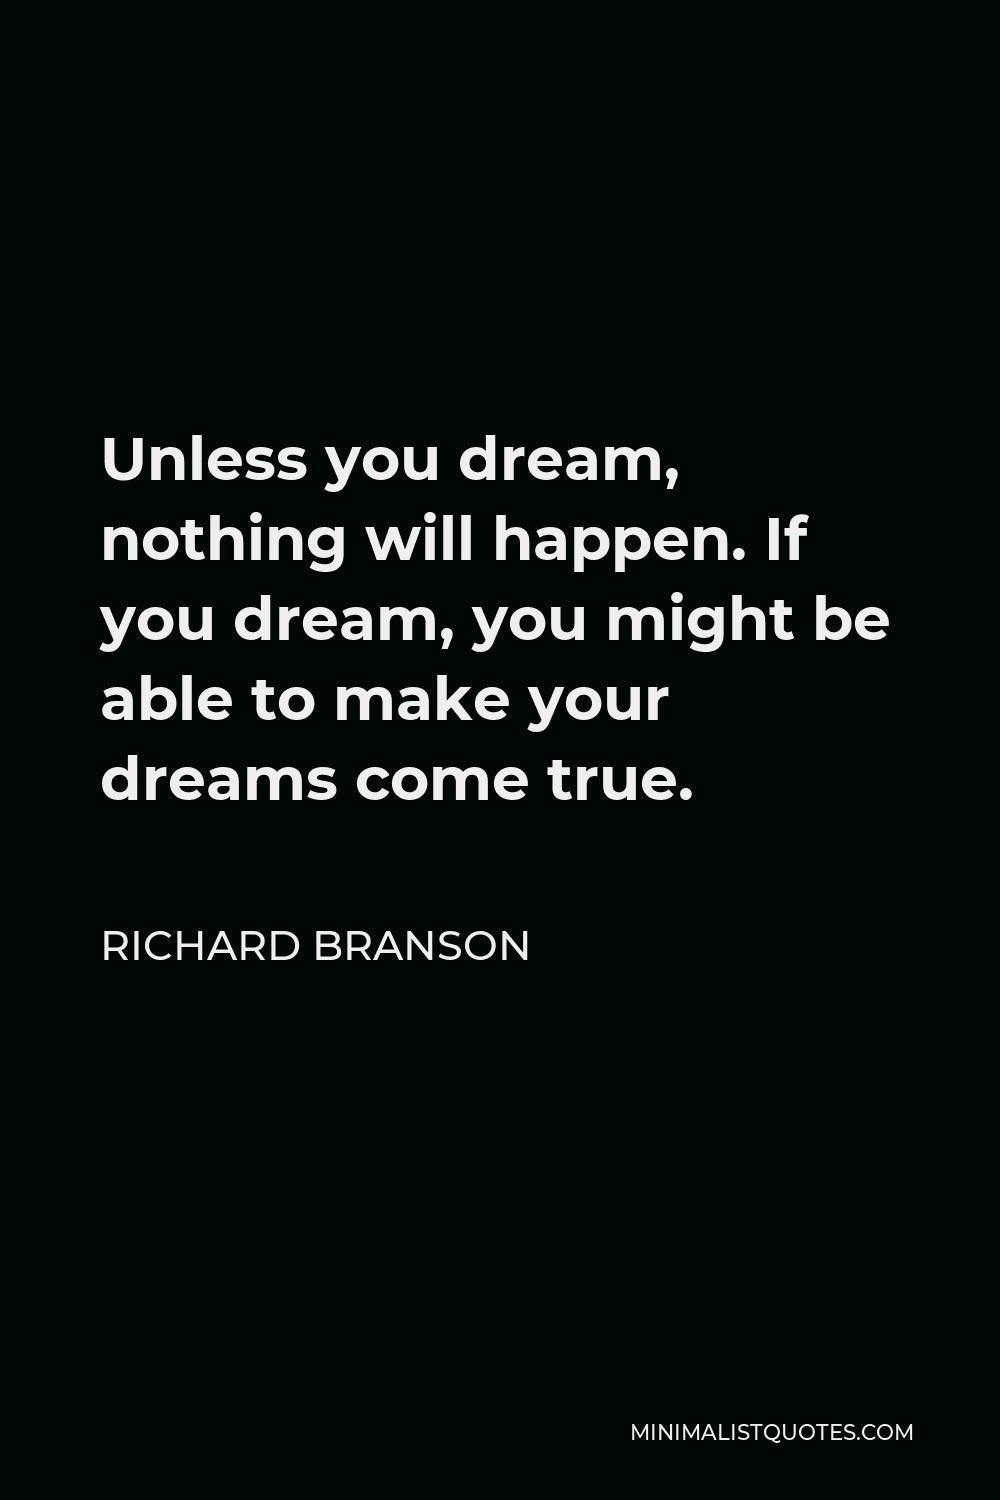 Richard Branson Quote - Unless you dream, nothing will happen. If you dream, you might be able to make your dreams come true.